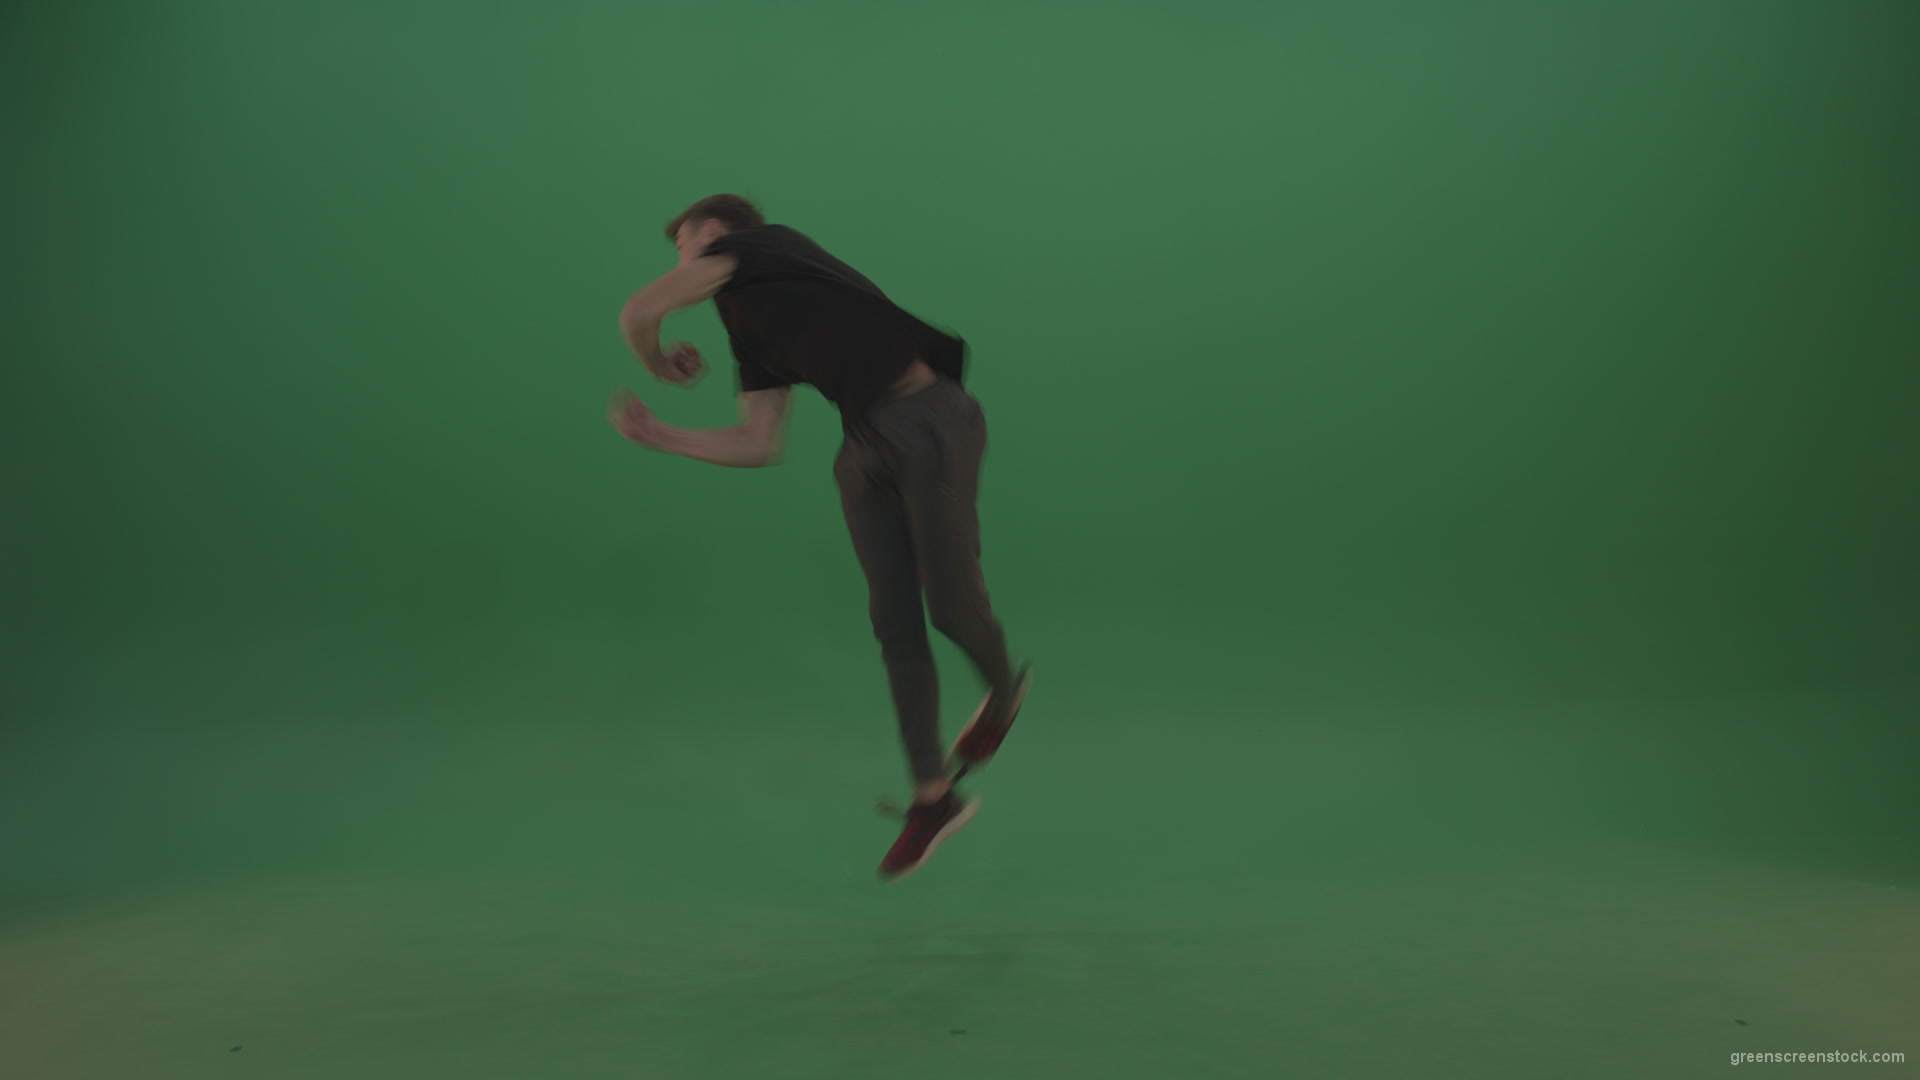 Young_Dark_Hair_Boy_Does_Perfect_Scoot_Back_360_Freerun_Parkour_Trick_On_Green_Screen_Wall_Background_007 Green Screen Stock